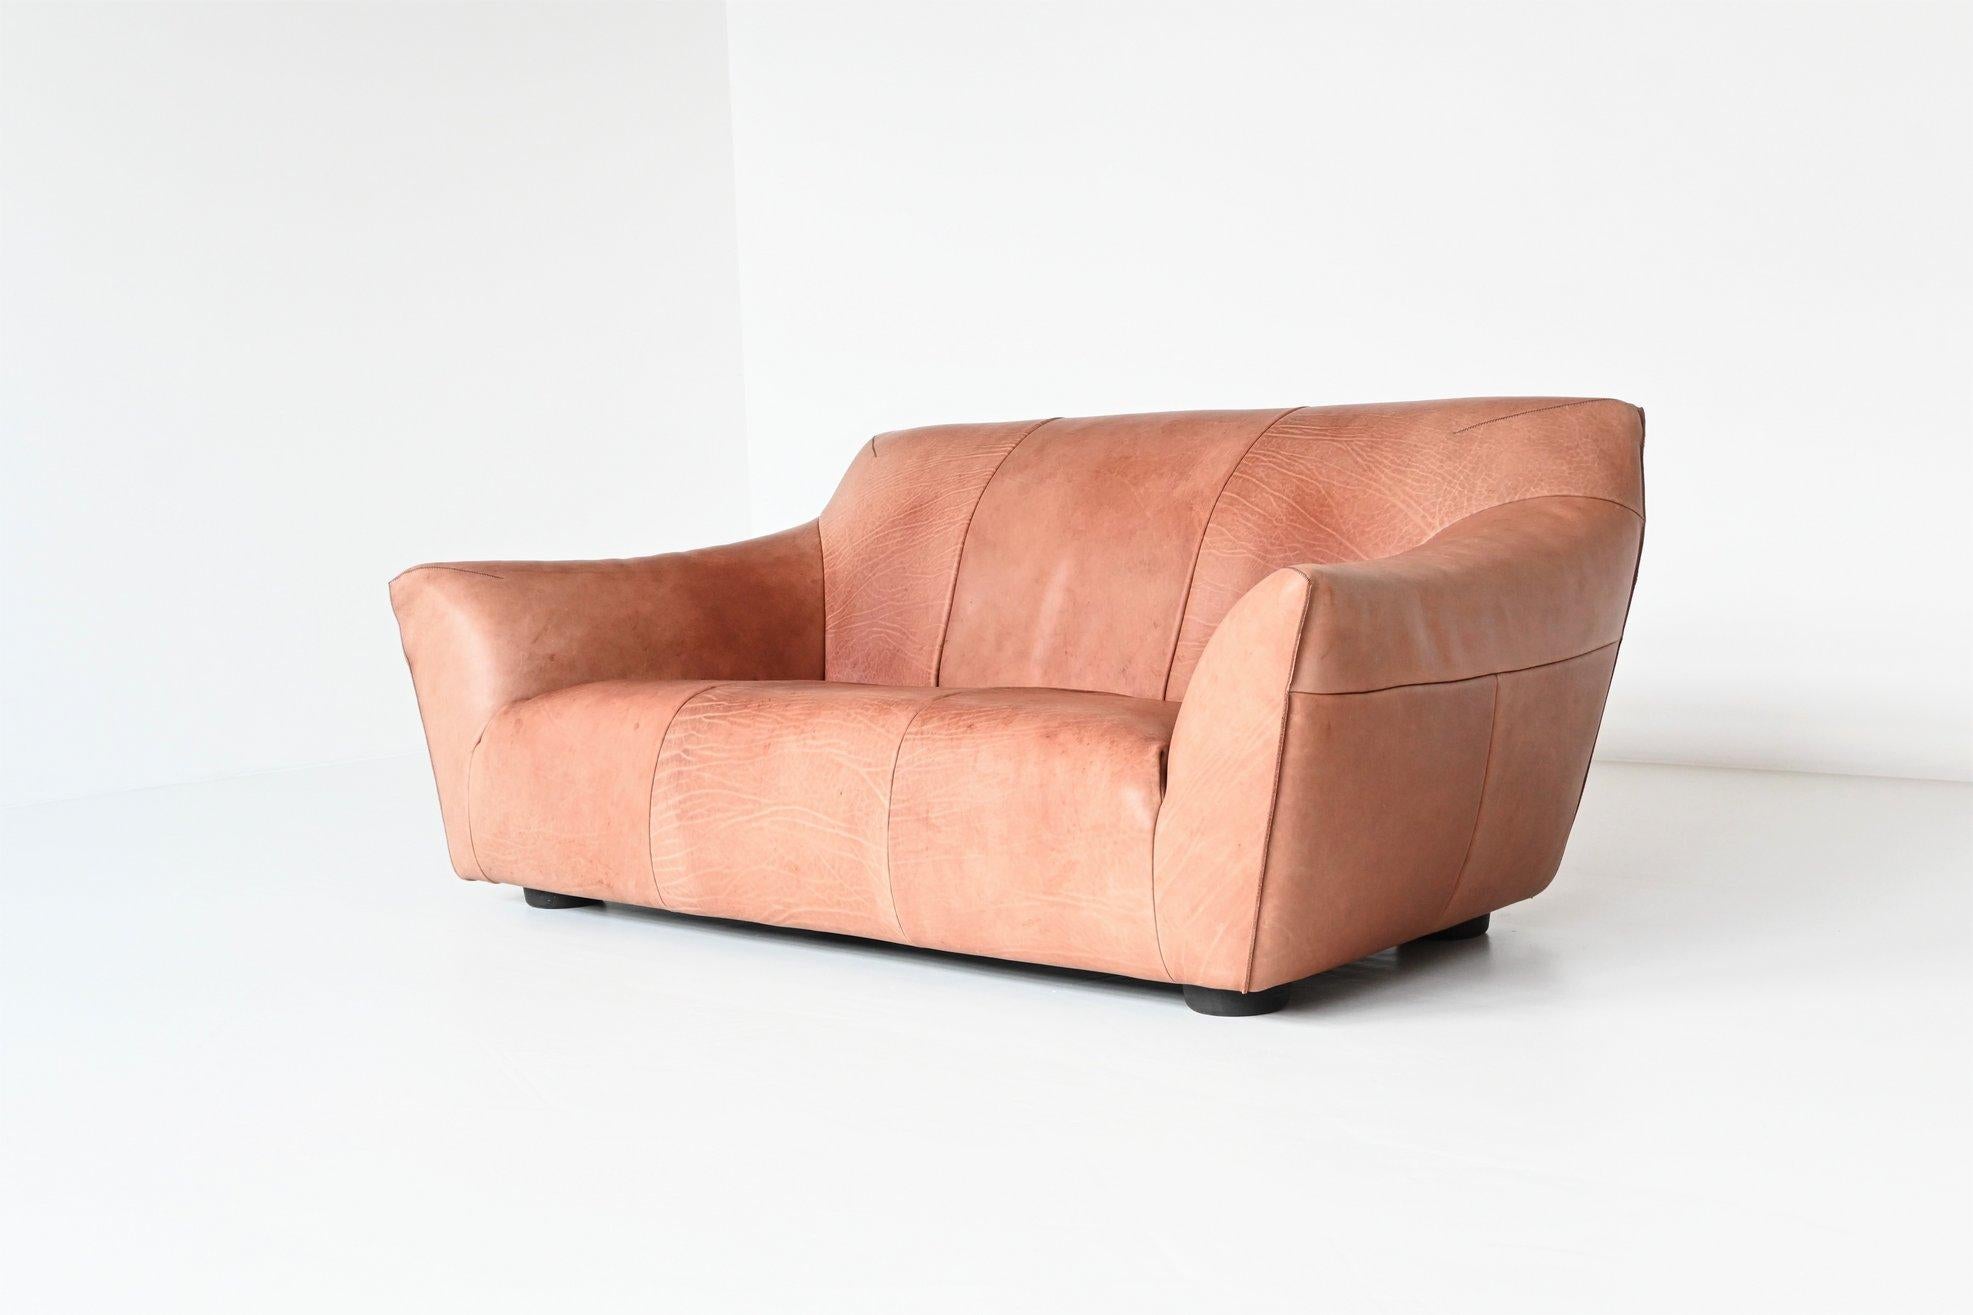 Fantastic shaped and very comfortable lounge sofa model Mancha designed by Gerard van den Berg for Label, The Netherlands 1990. The Mancha welcomes you with open arms. It is a compact sofa with a generous appearance. The thick buffalo leather